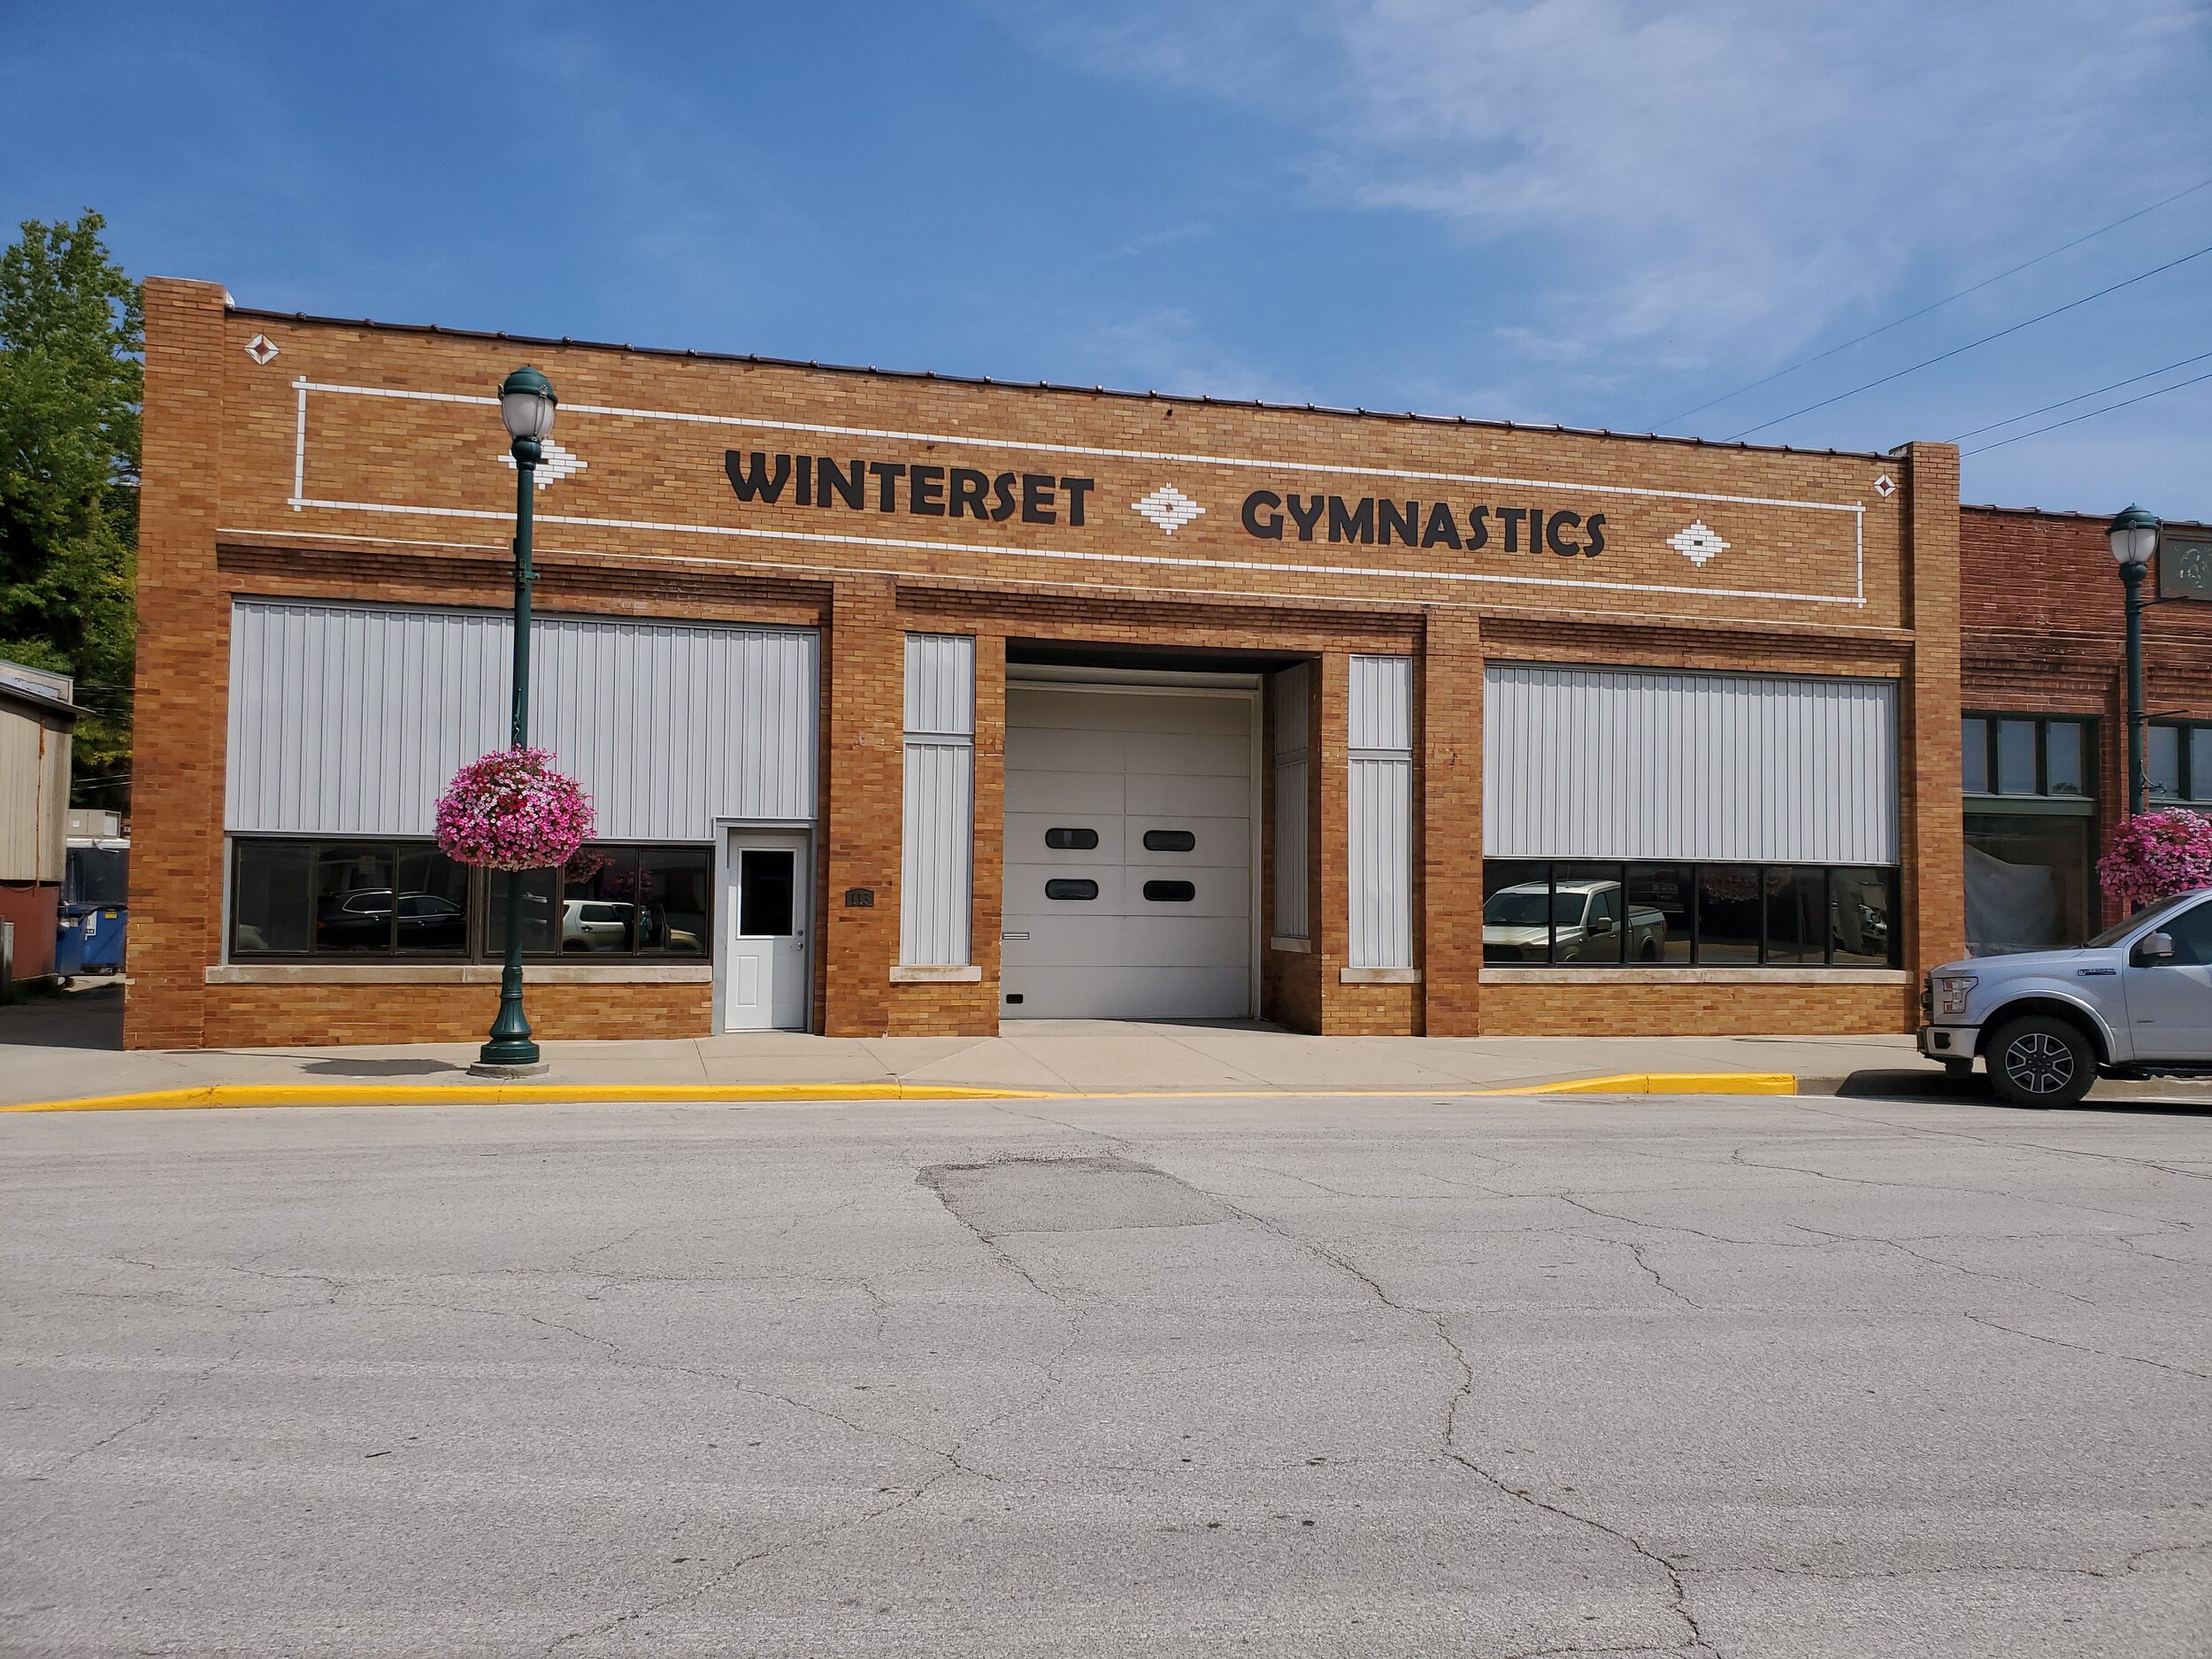 Picture Tour of our Gym — Winterset Gymnastics